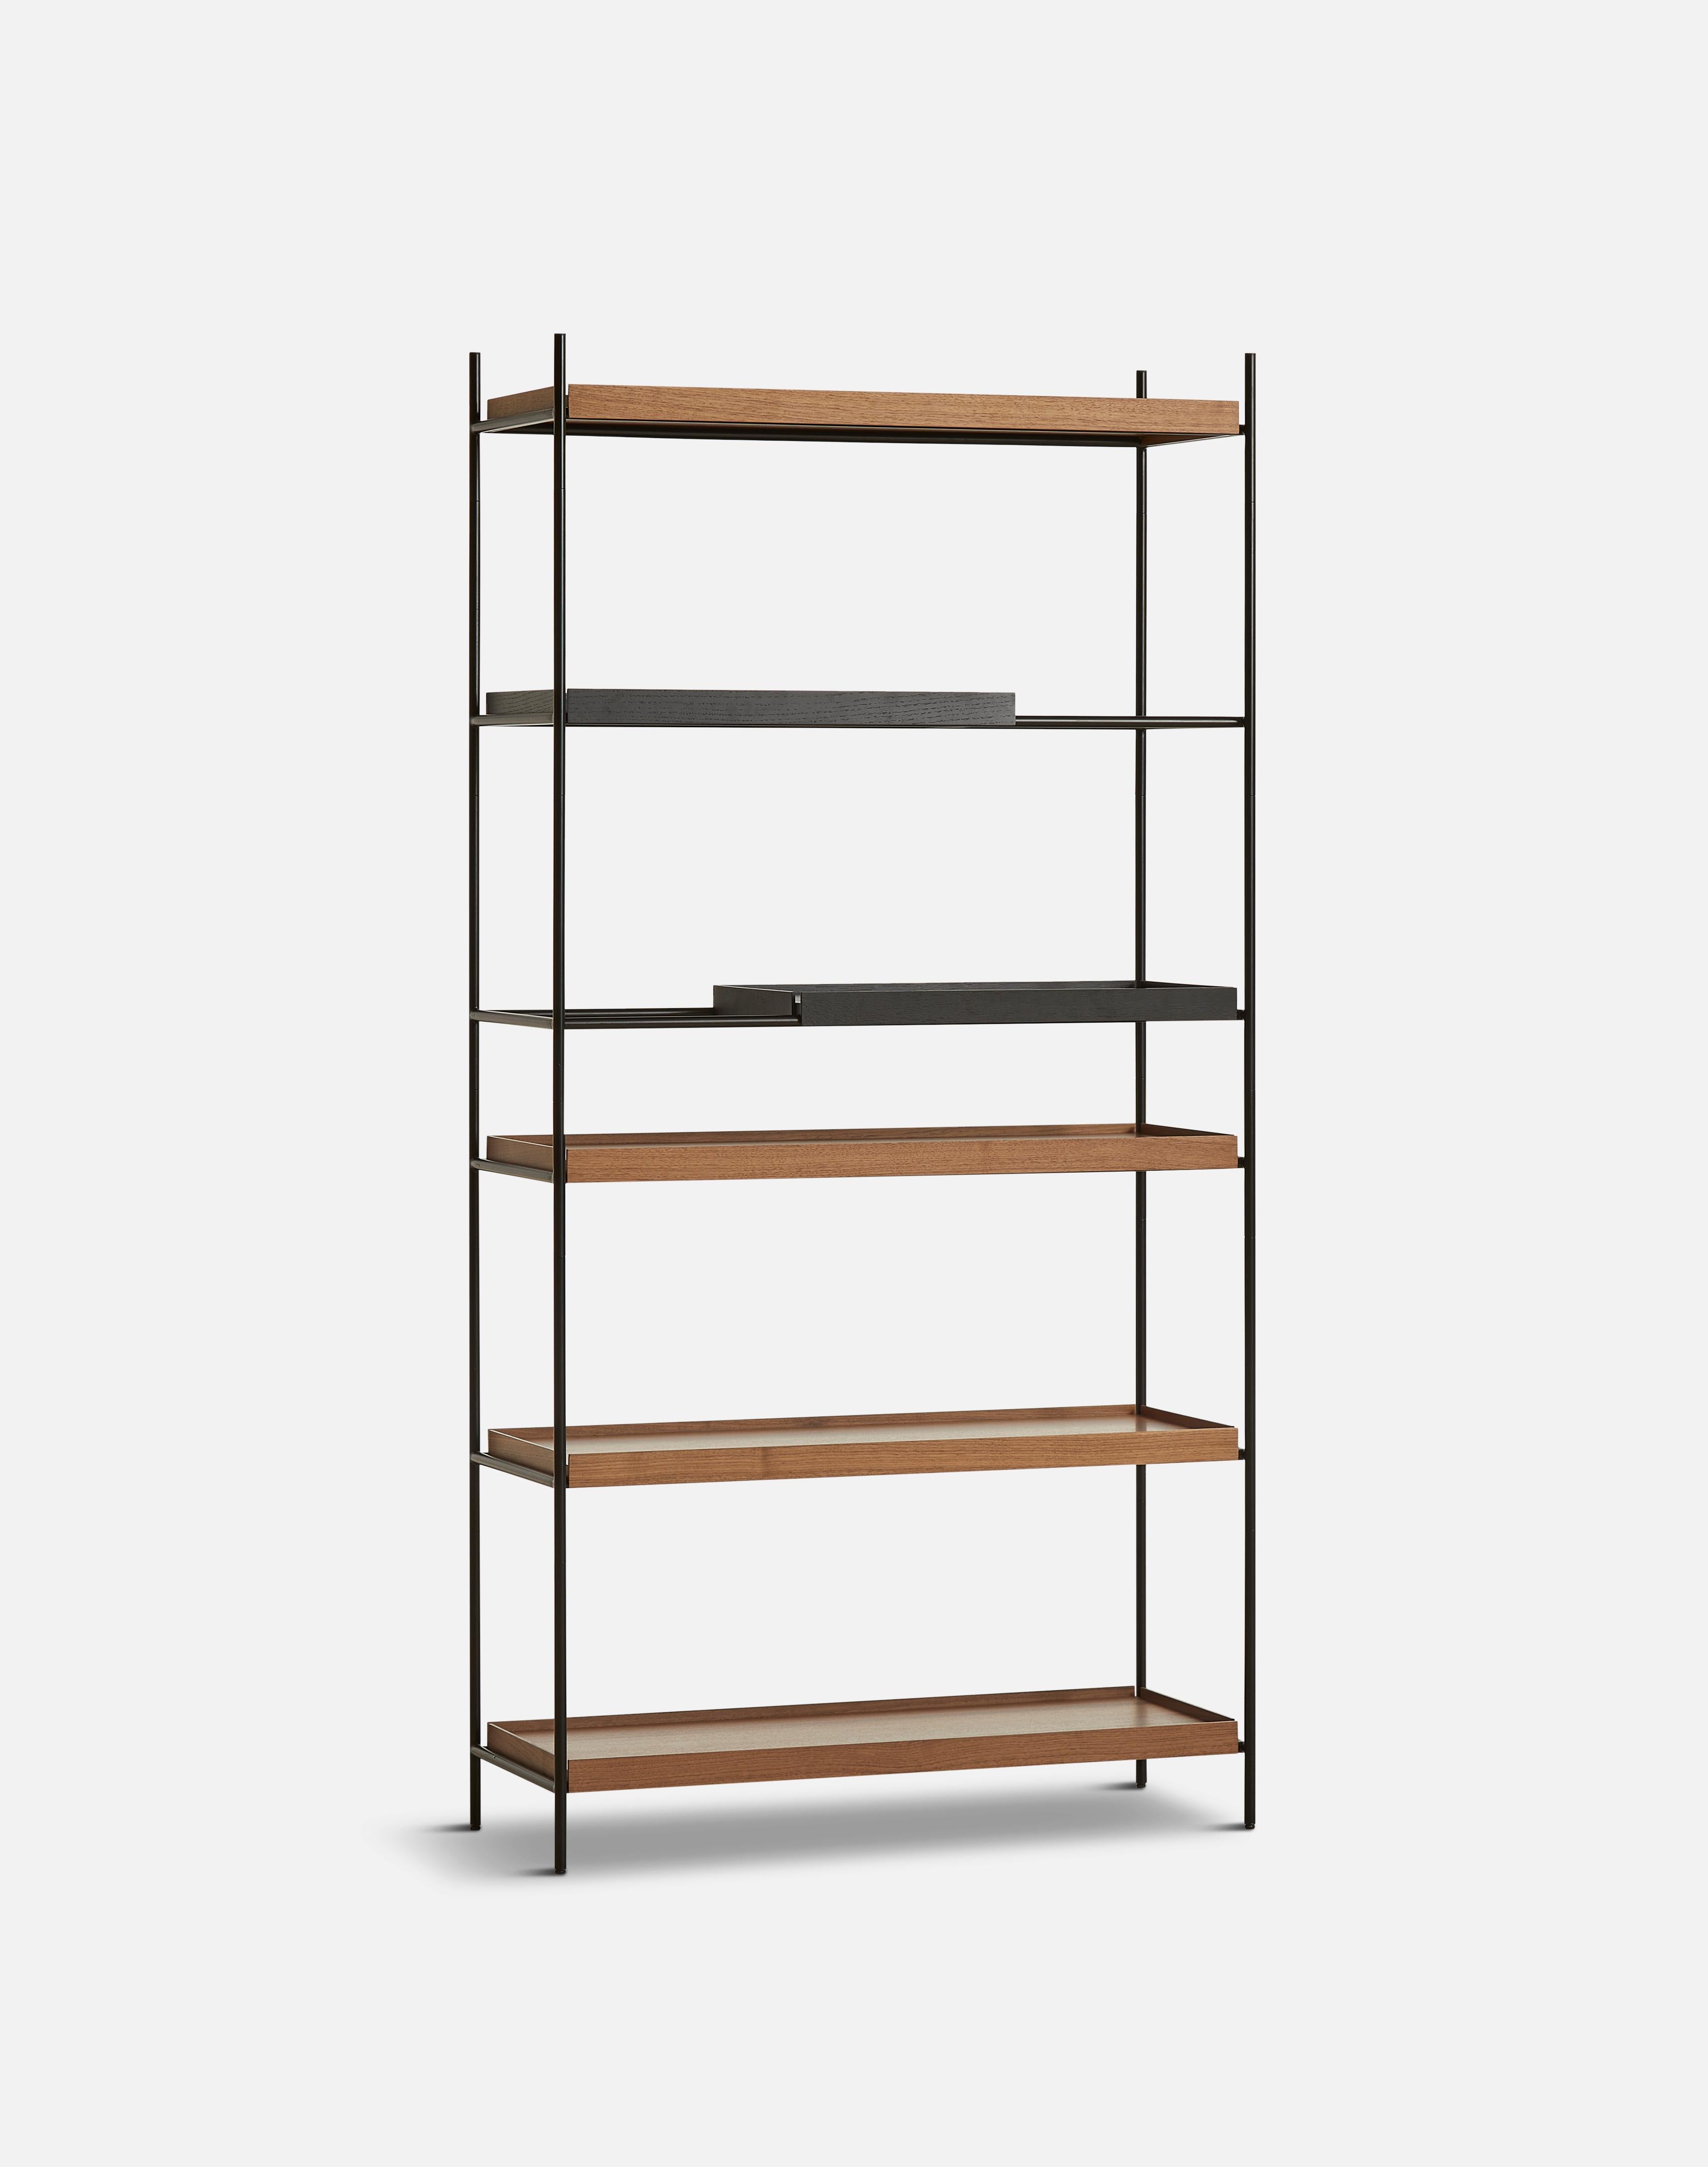 High walnut and black tray shelf VII by Hanne Willmann.
Materials: Metal, walnut.
Dimensions: D 40 x W 100 x H 201 cm.
Also available in different tray conbinations and 2 sizes: H81, H 201 cm.

Hanne Willmann is a dynamic German designer with